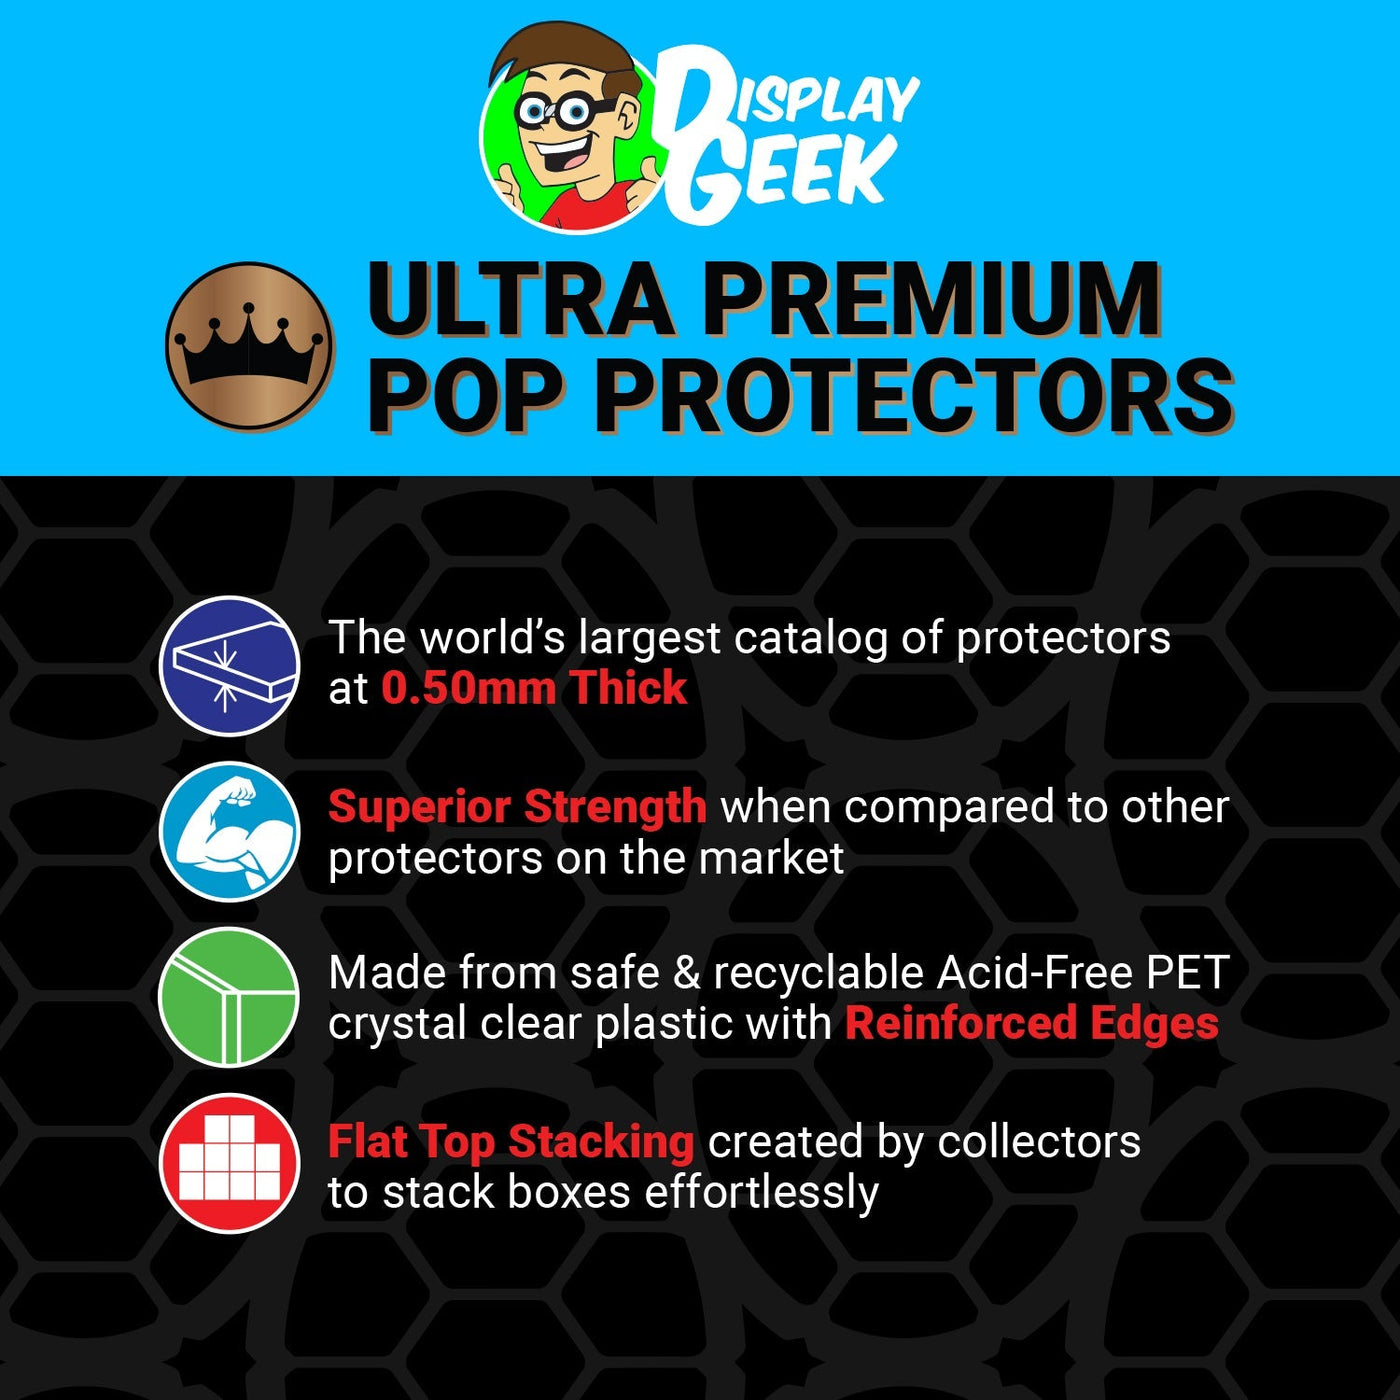 Pop Protector for Big Boy Funko Pop Pez on The Protector Guide App by Display Geek